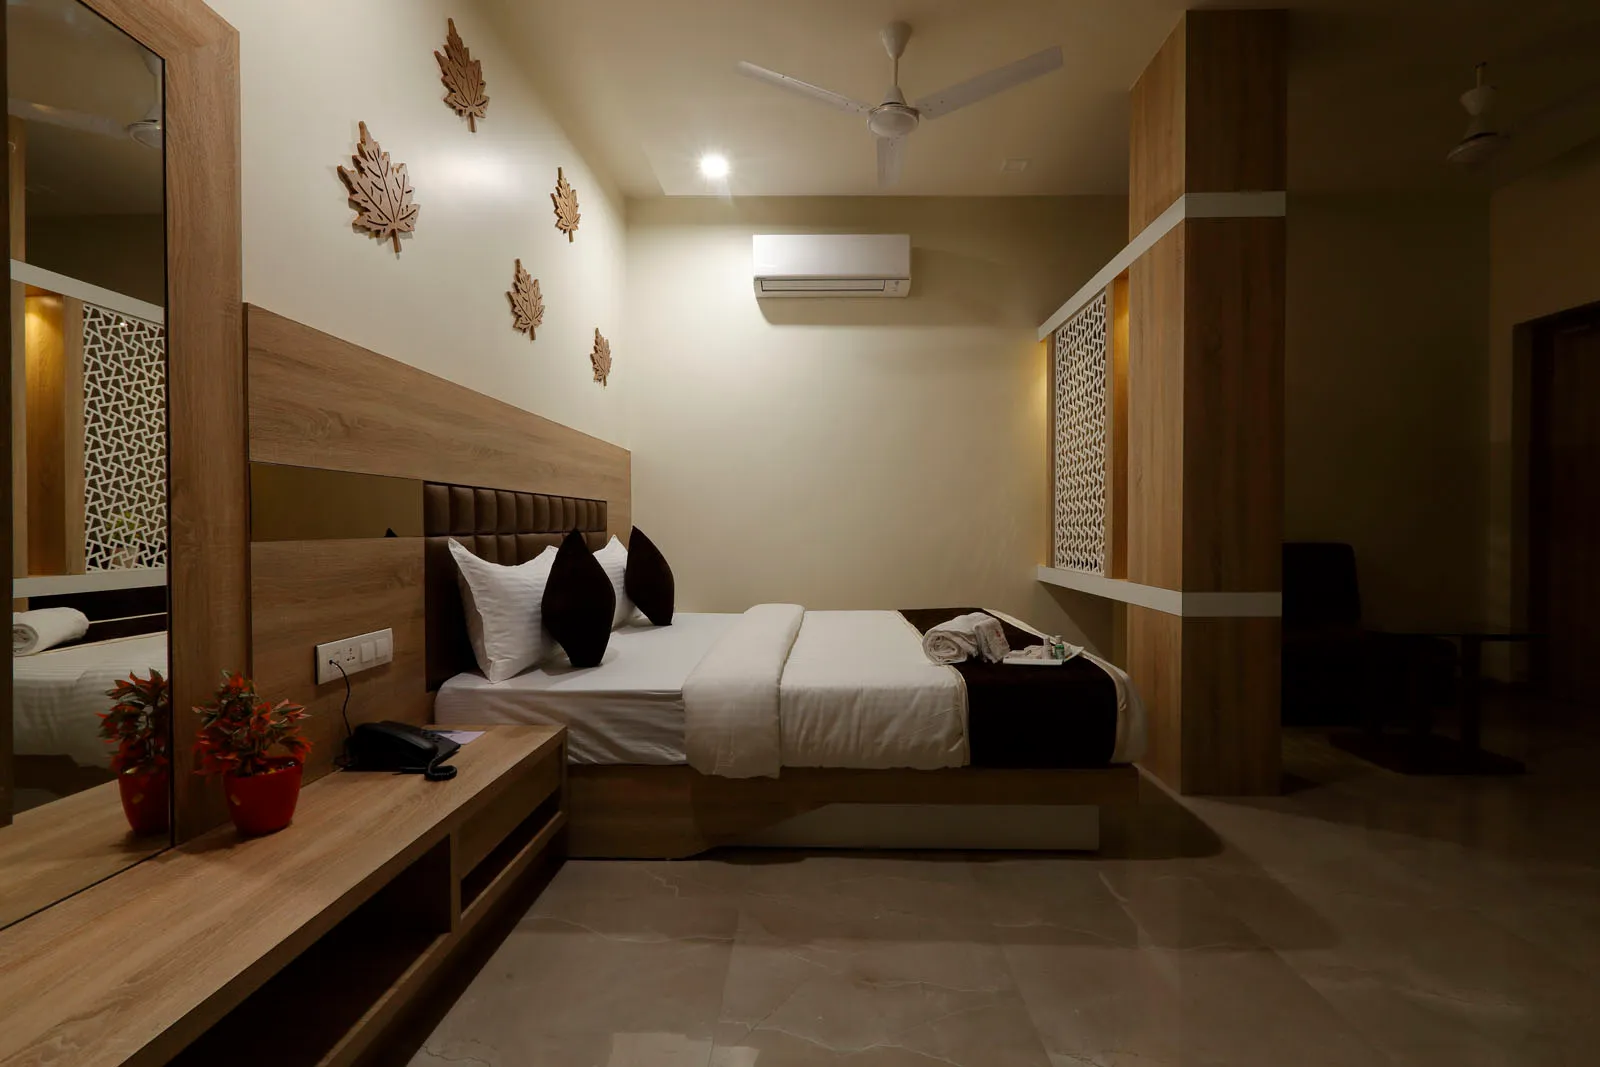 Hotels at best price in relief road, ahmedabad